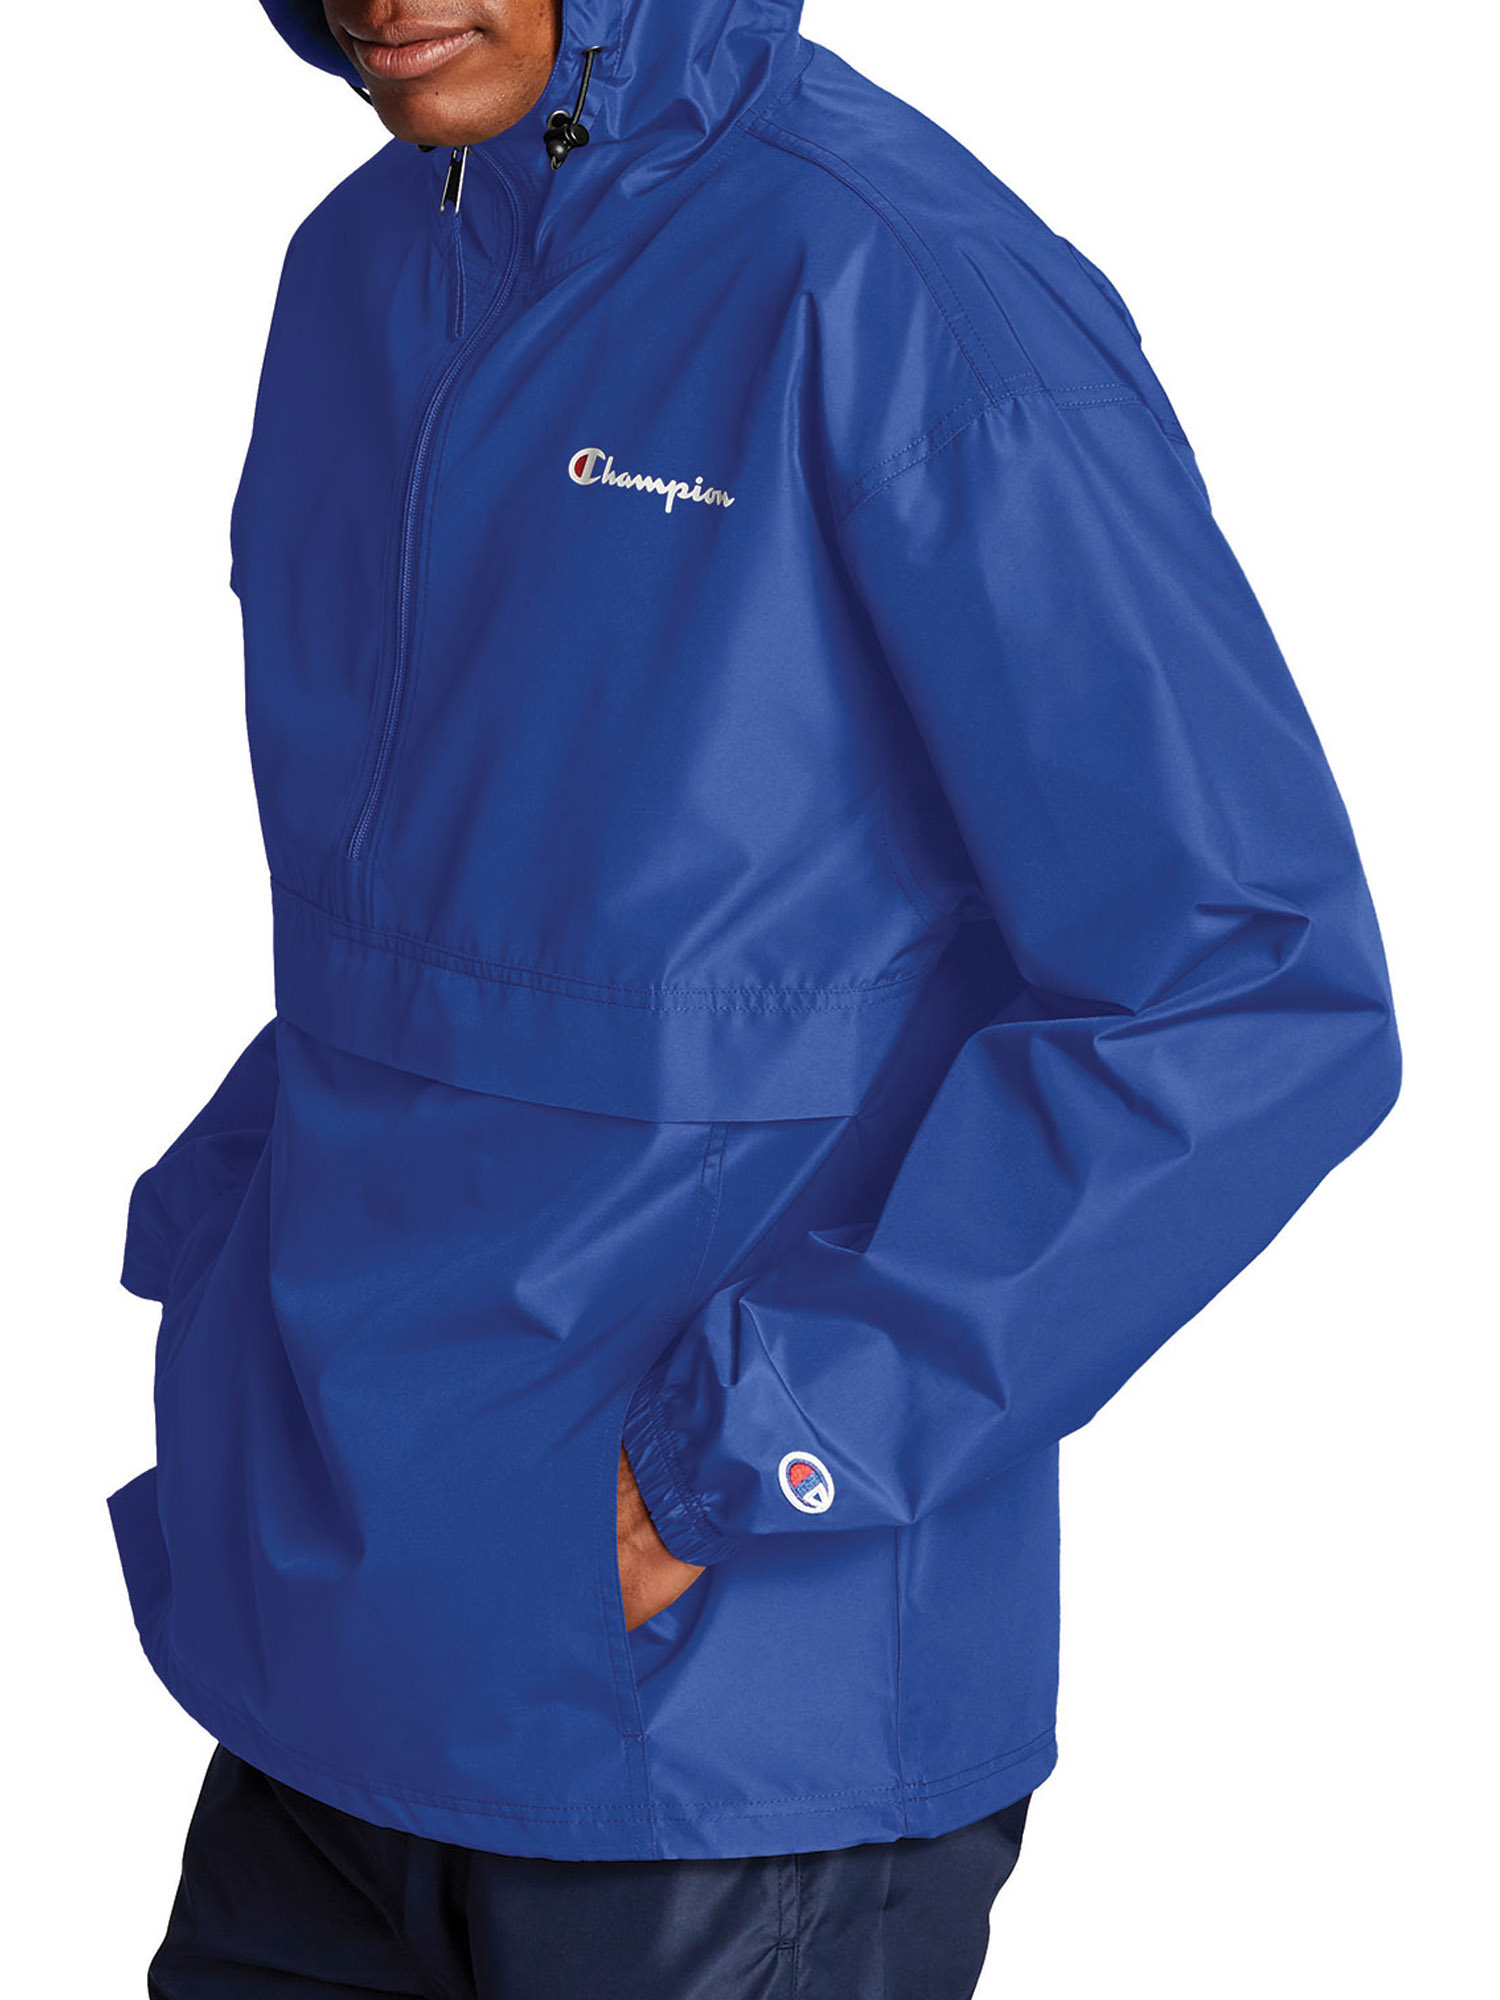 Champion Men's and Big Men's Stadium Packable Windbreaker Jacket, up to Size 2XL - image 4 of 7